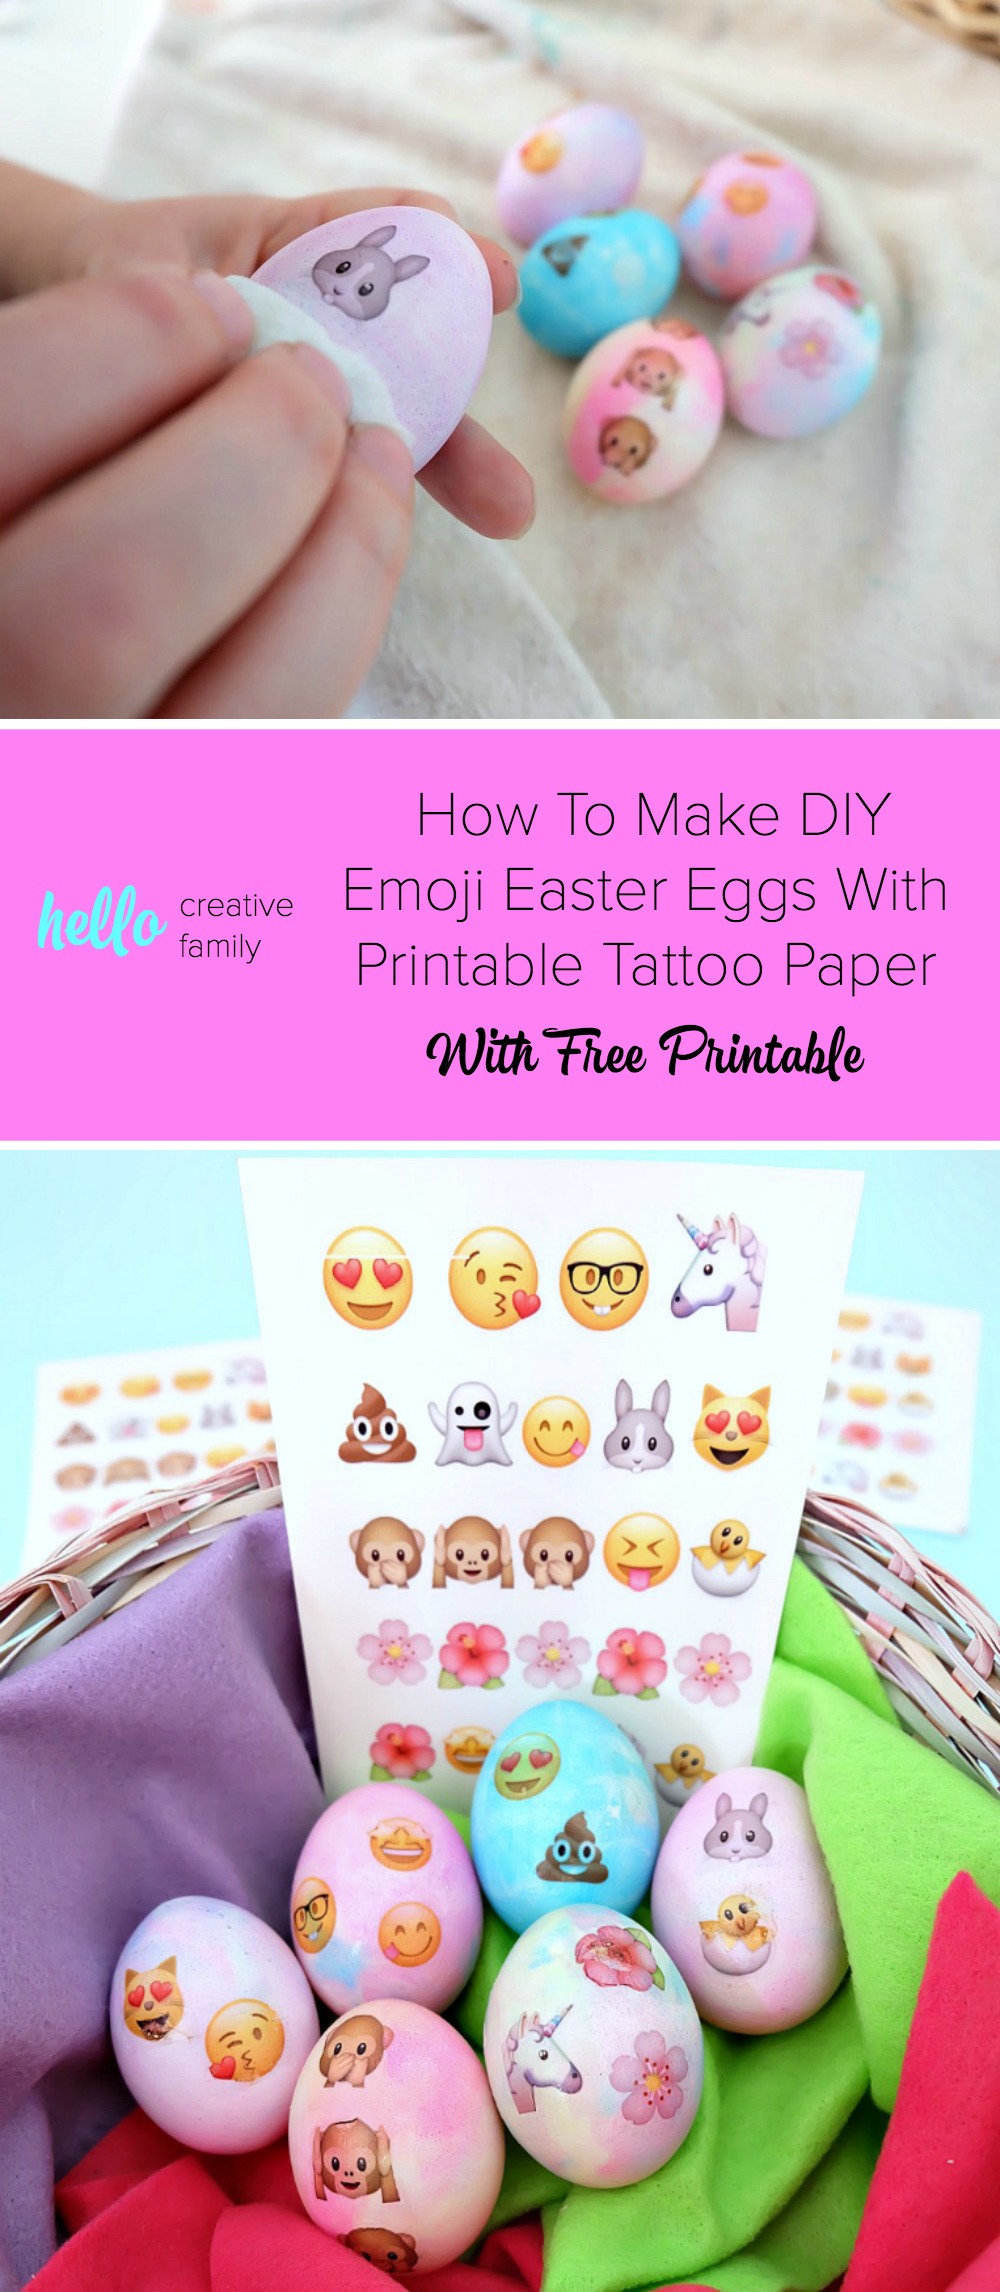 Hippity Hop! Easter is almost here and this fun project is perfect for the holiday! Make adorable DIY Emoji Easter Eggs with this fun tutorial that kids will love to craft! Shares instructions for dying the eggs with whipped cream and food coloring as well as applying the emojis with printable temporary tattoo paper! Includes the free printable too! #Easter #emojis #kidscrafts